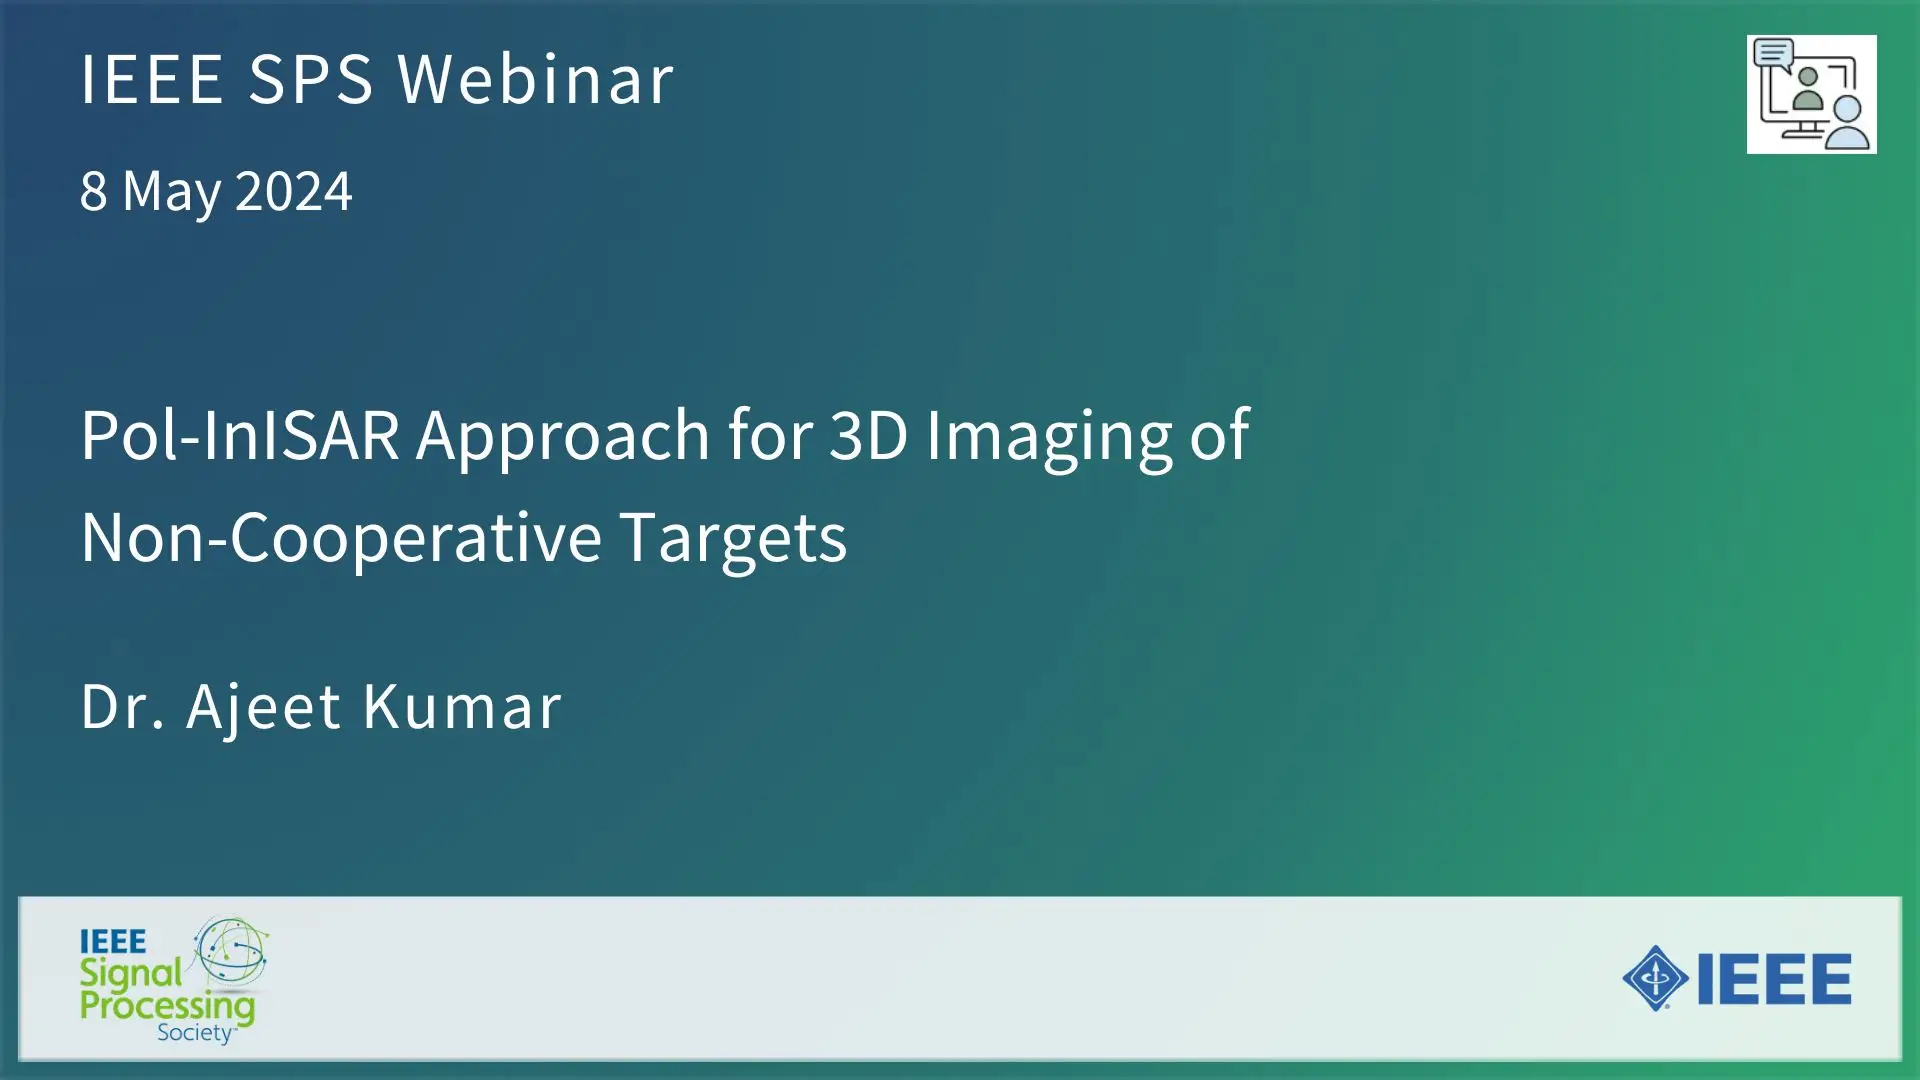 Pol-InISAR Approach for 3D Imaging of Non-Cooperative Targets